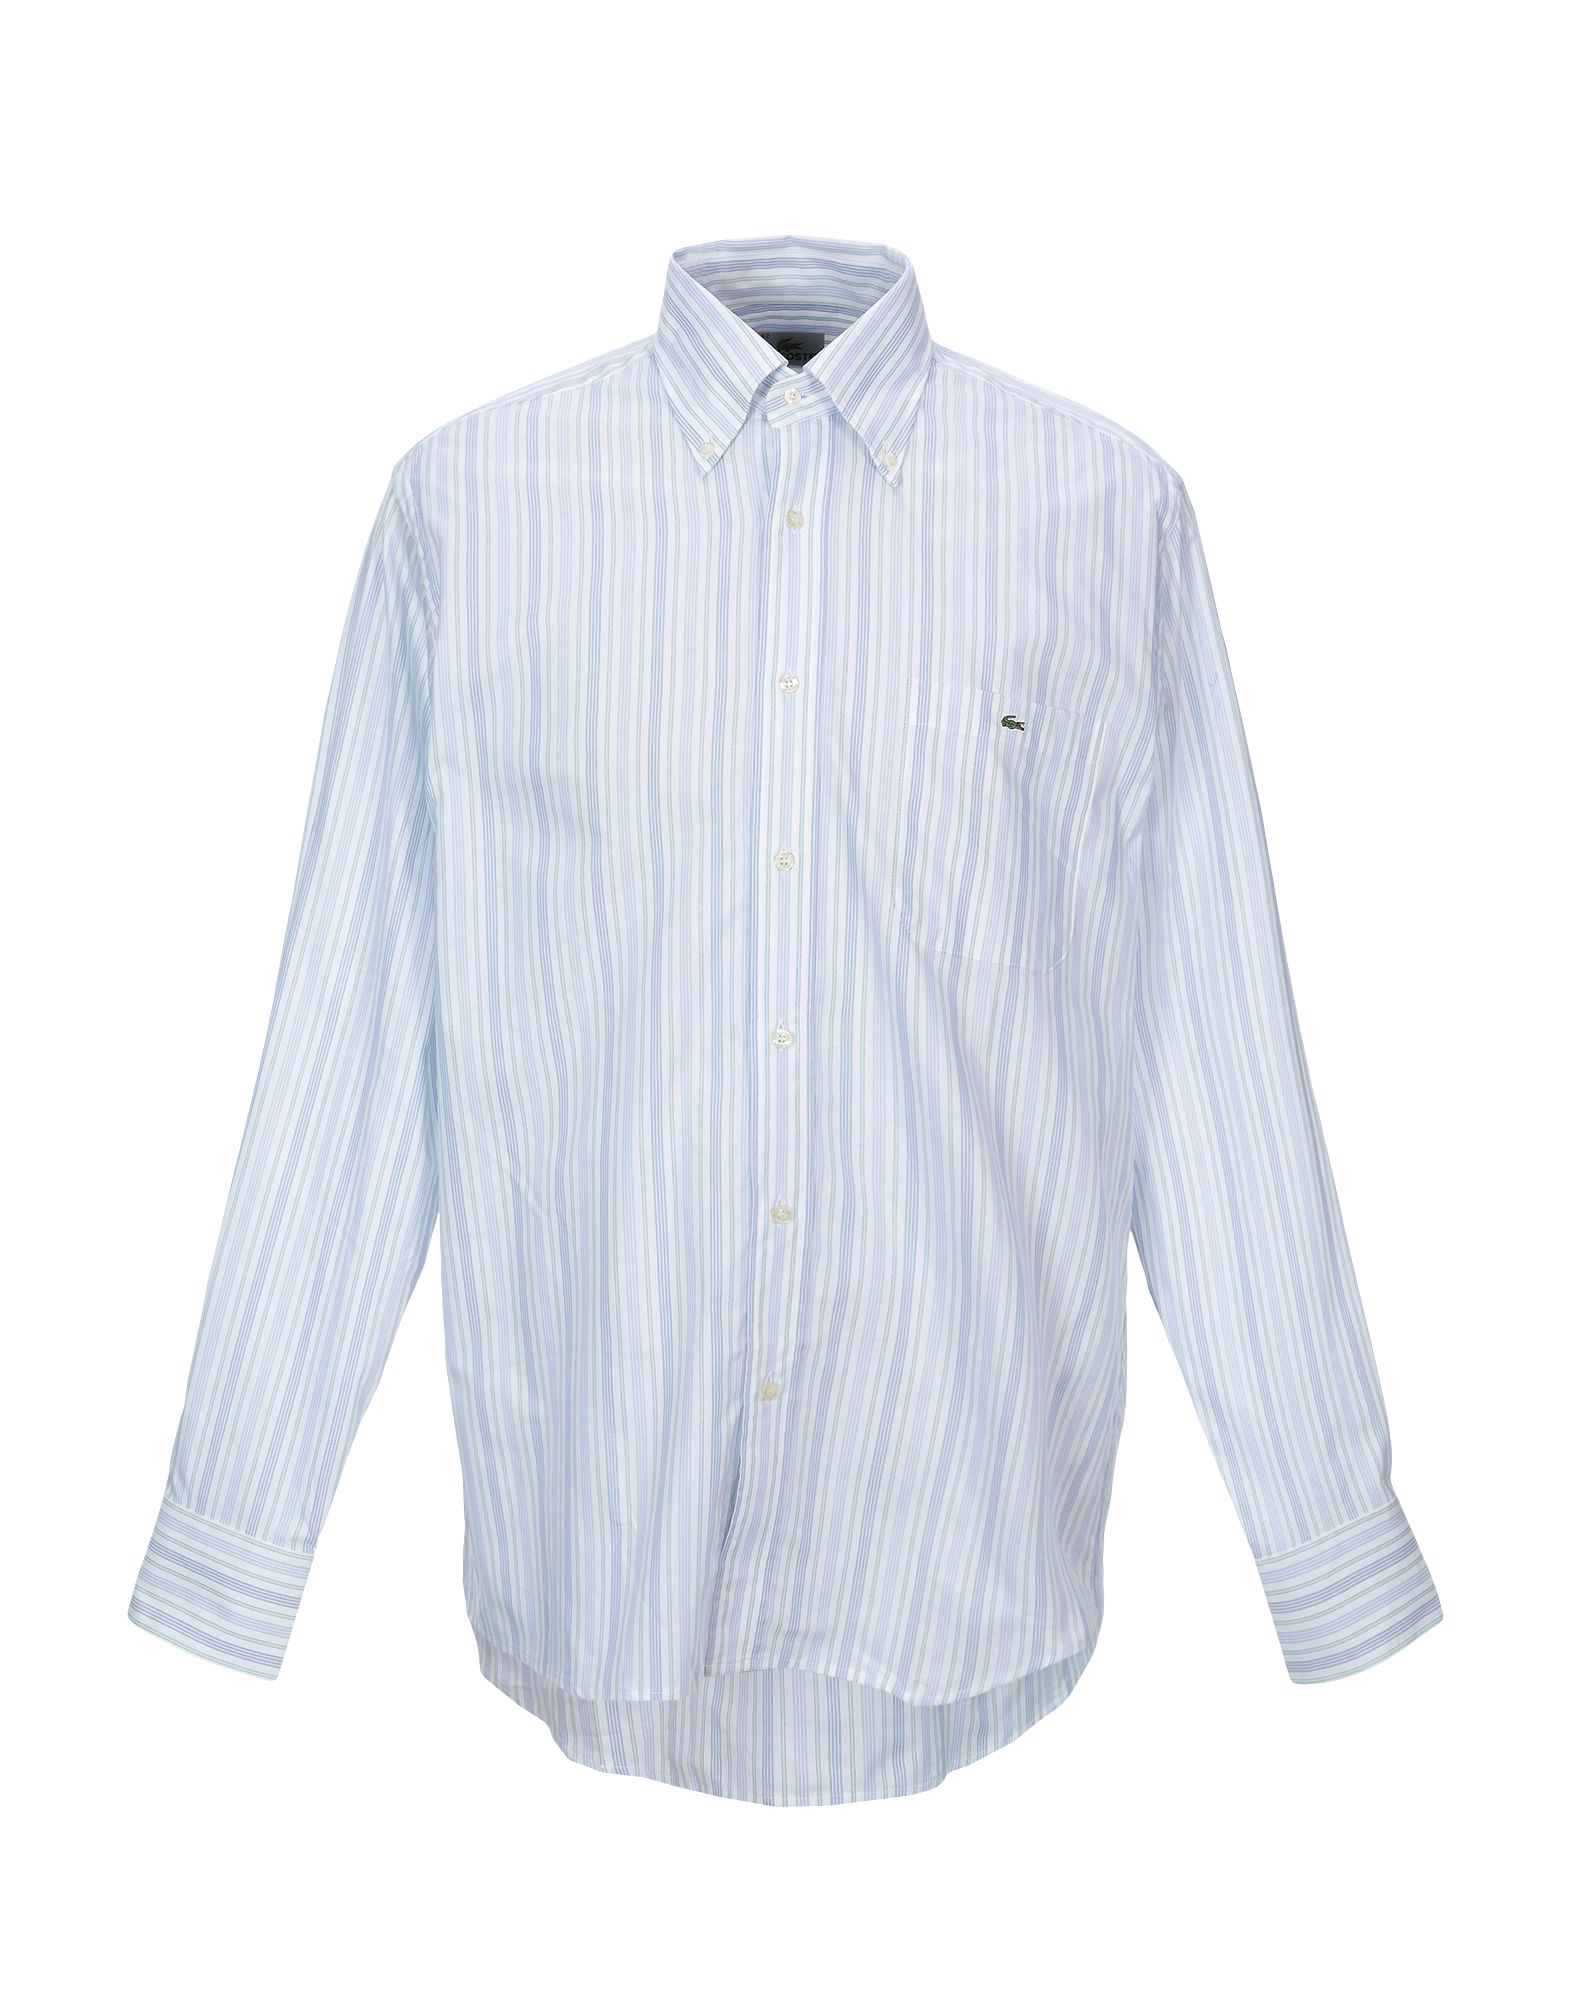 Lacoste Striped Shirt In White | ModeSens